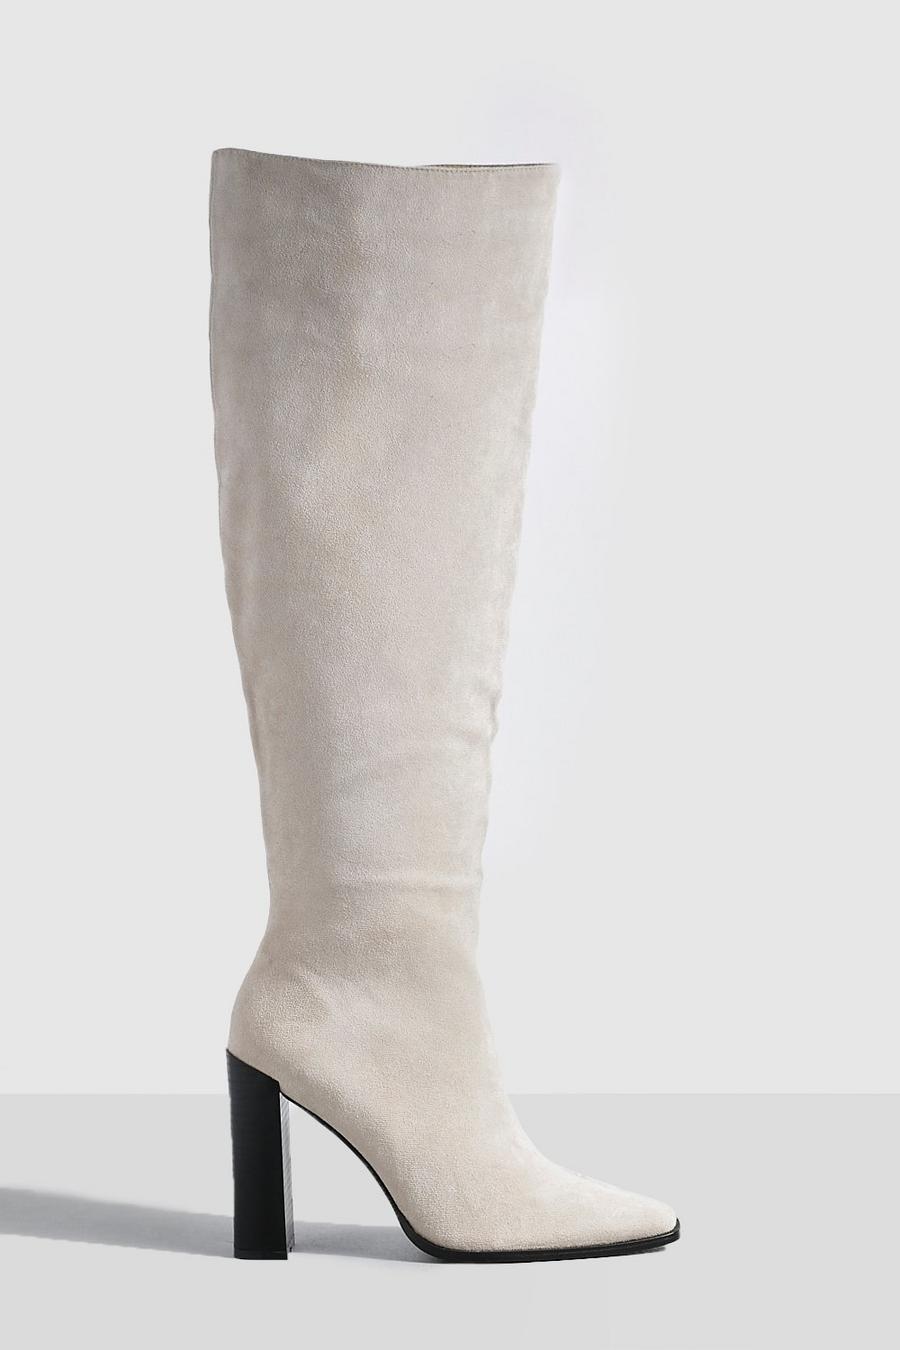 Stone Stack Heel Square Toe Knee High Boots